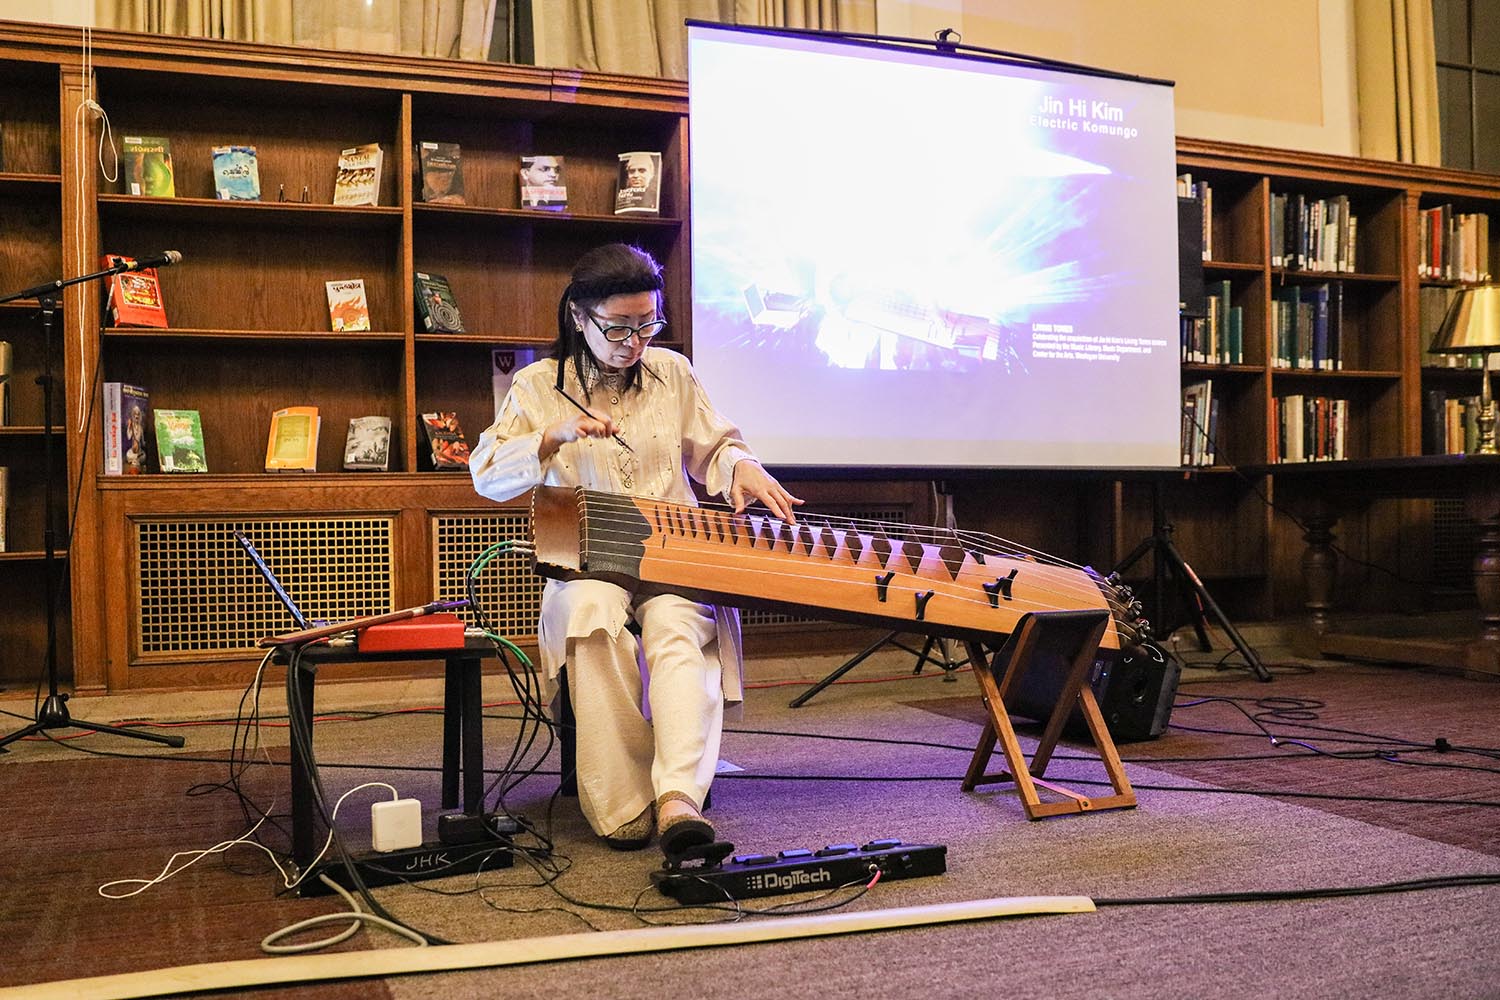 in Hi Kim discussed the compositional concept of Living Tones and presented a performance on the electric komungo (Korean stringed instrument).